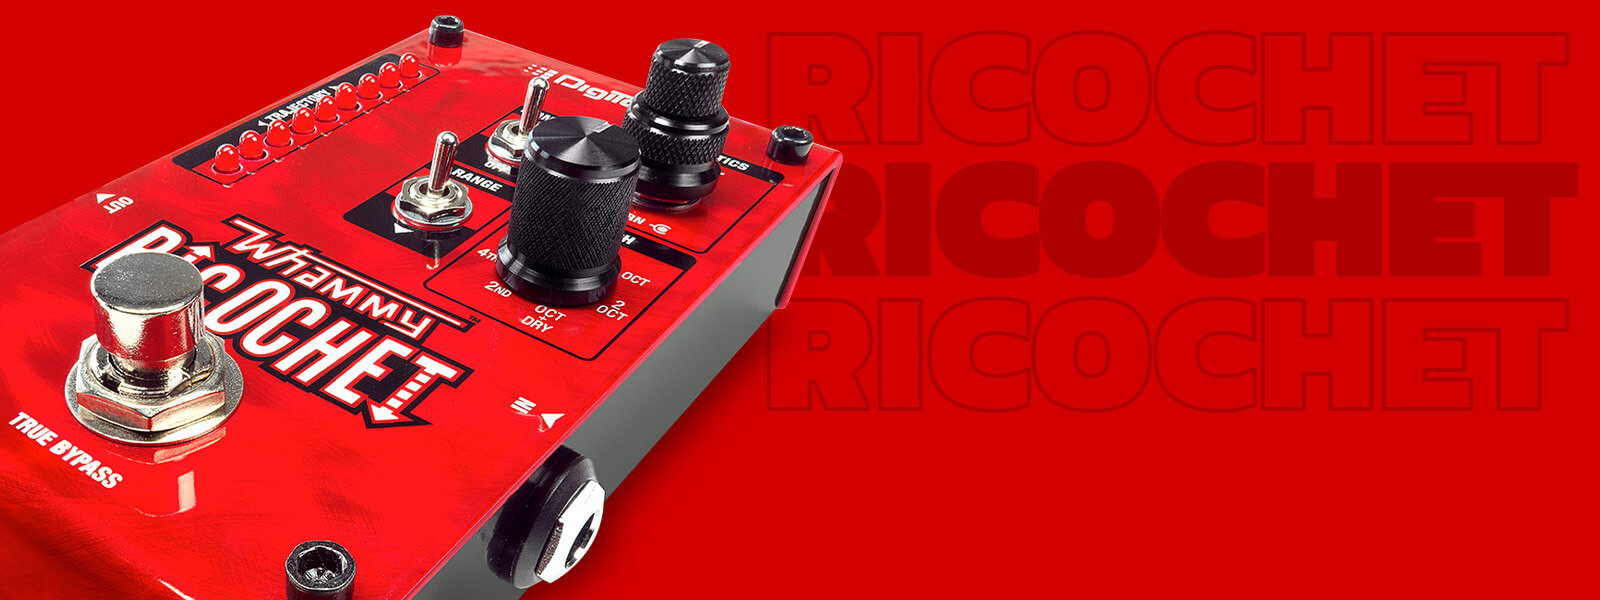 DigiTech Whammy Ricochet pitch shift guitar pedal in red with red background and graphics that says 